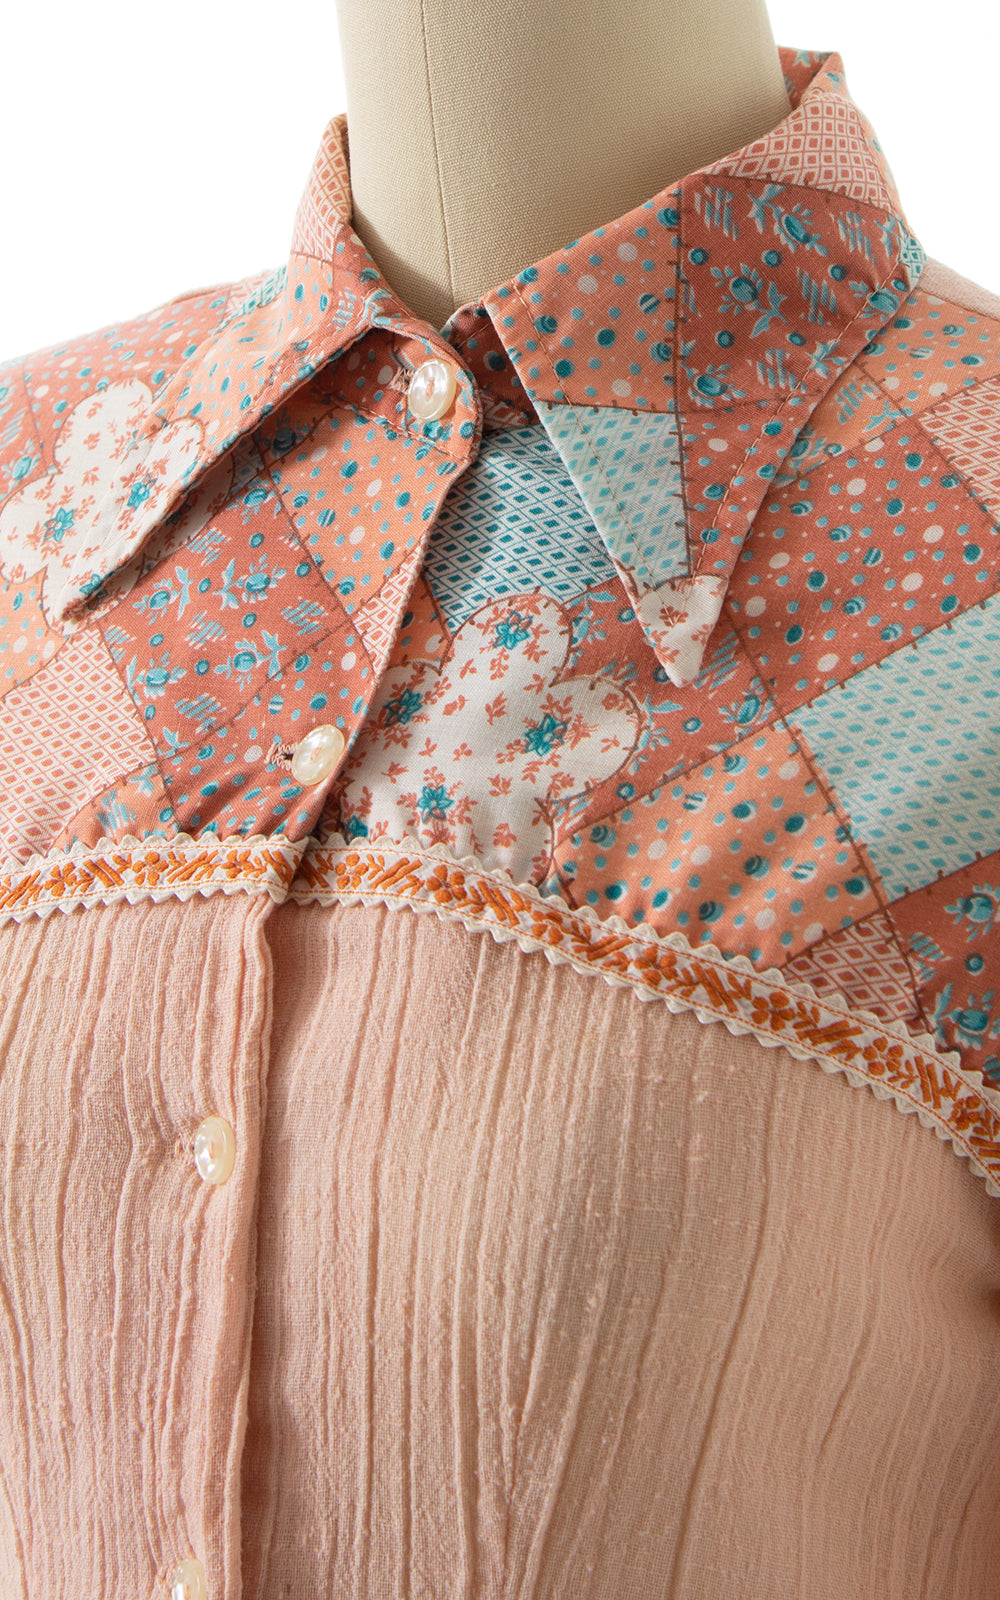 1970s Patchwork Cotton Gauze Blouse | x-small/small